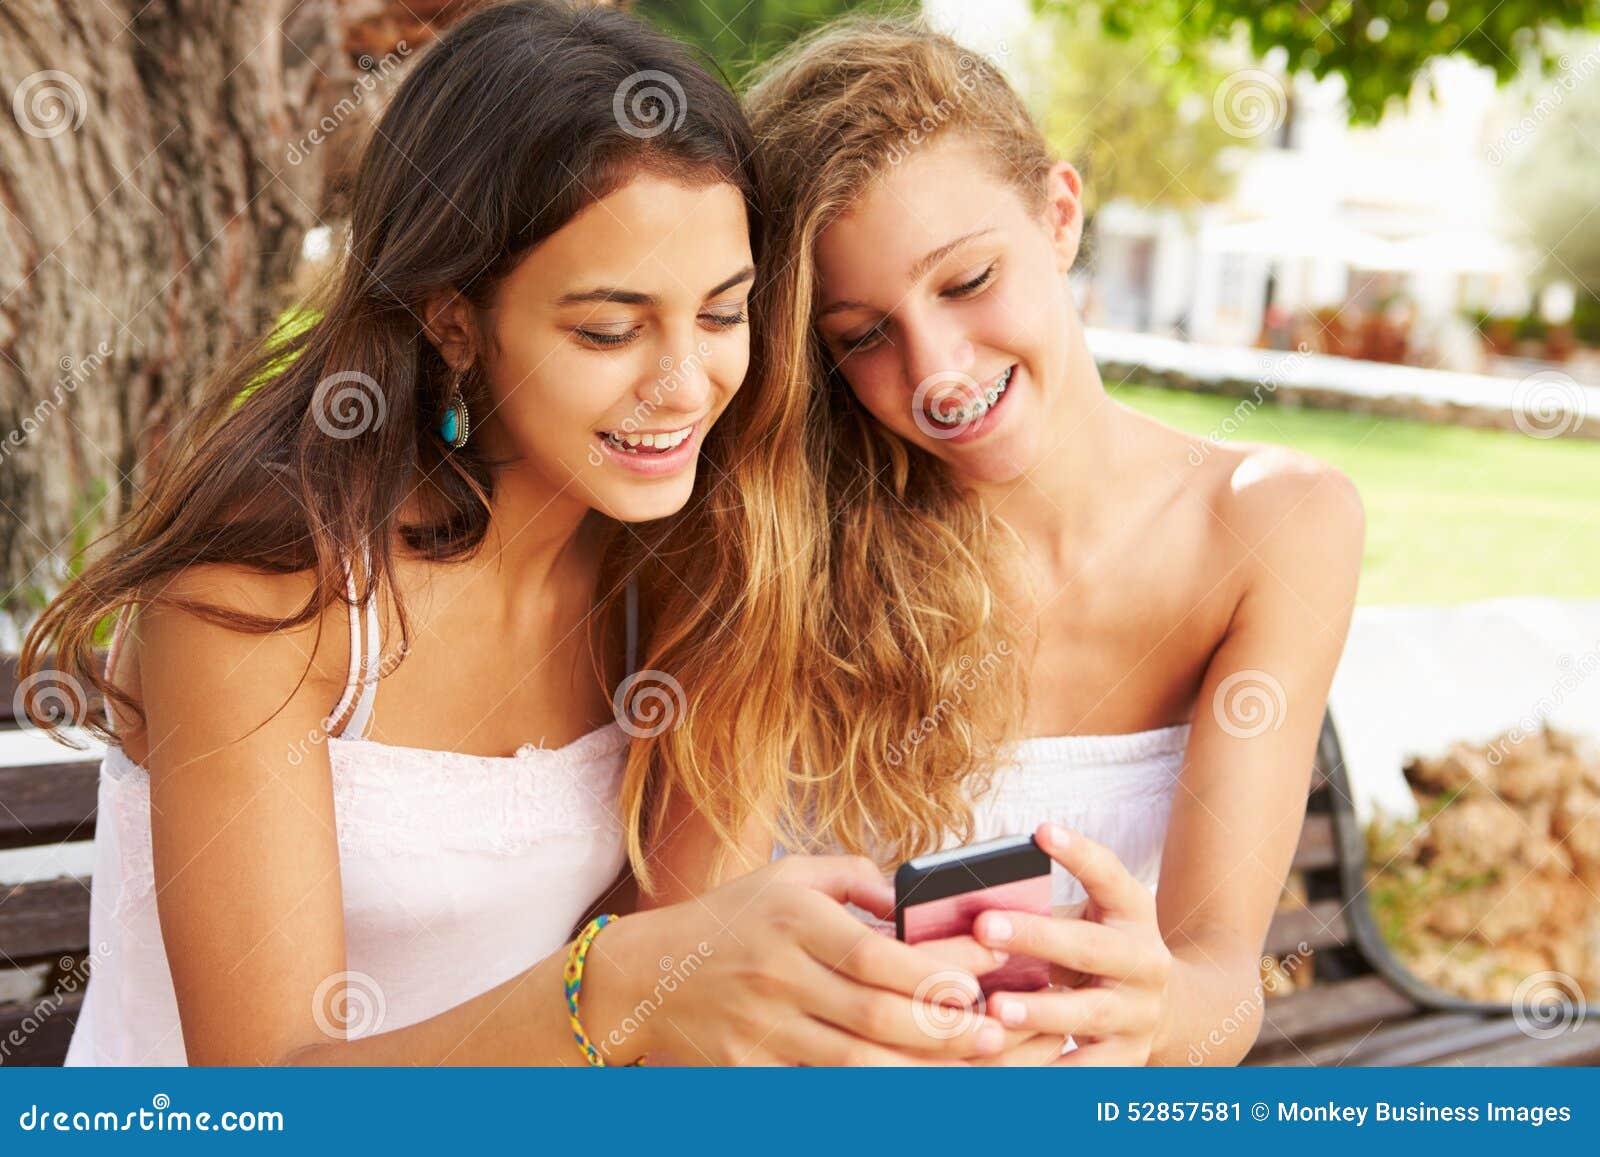 Two Teenage Girls Using Mobile Phone Sitting on Park Bench Stock Image ...